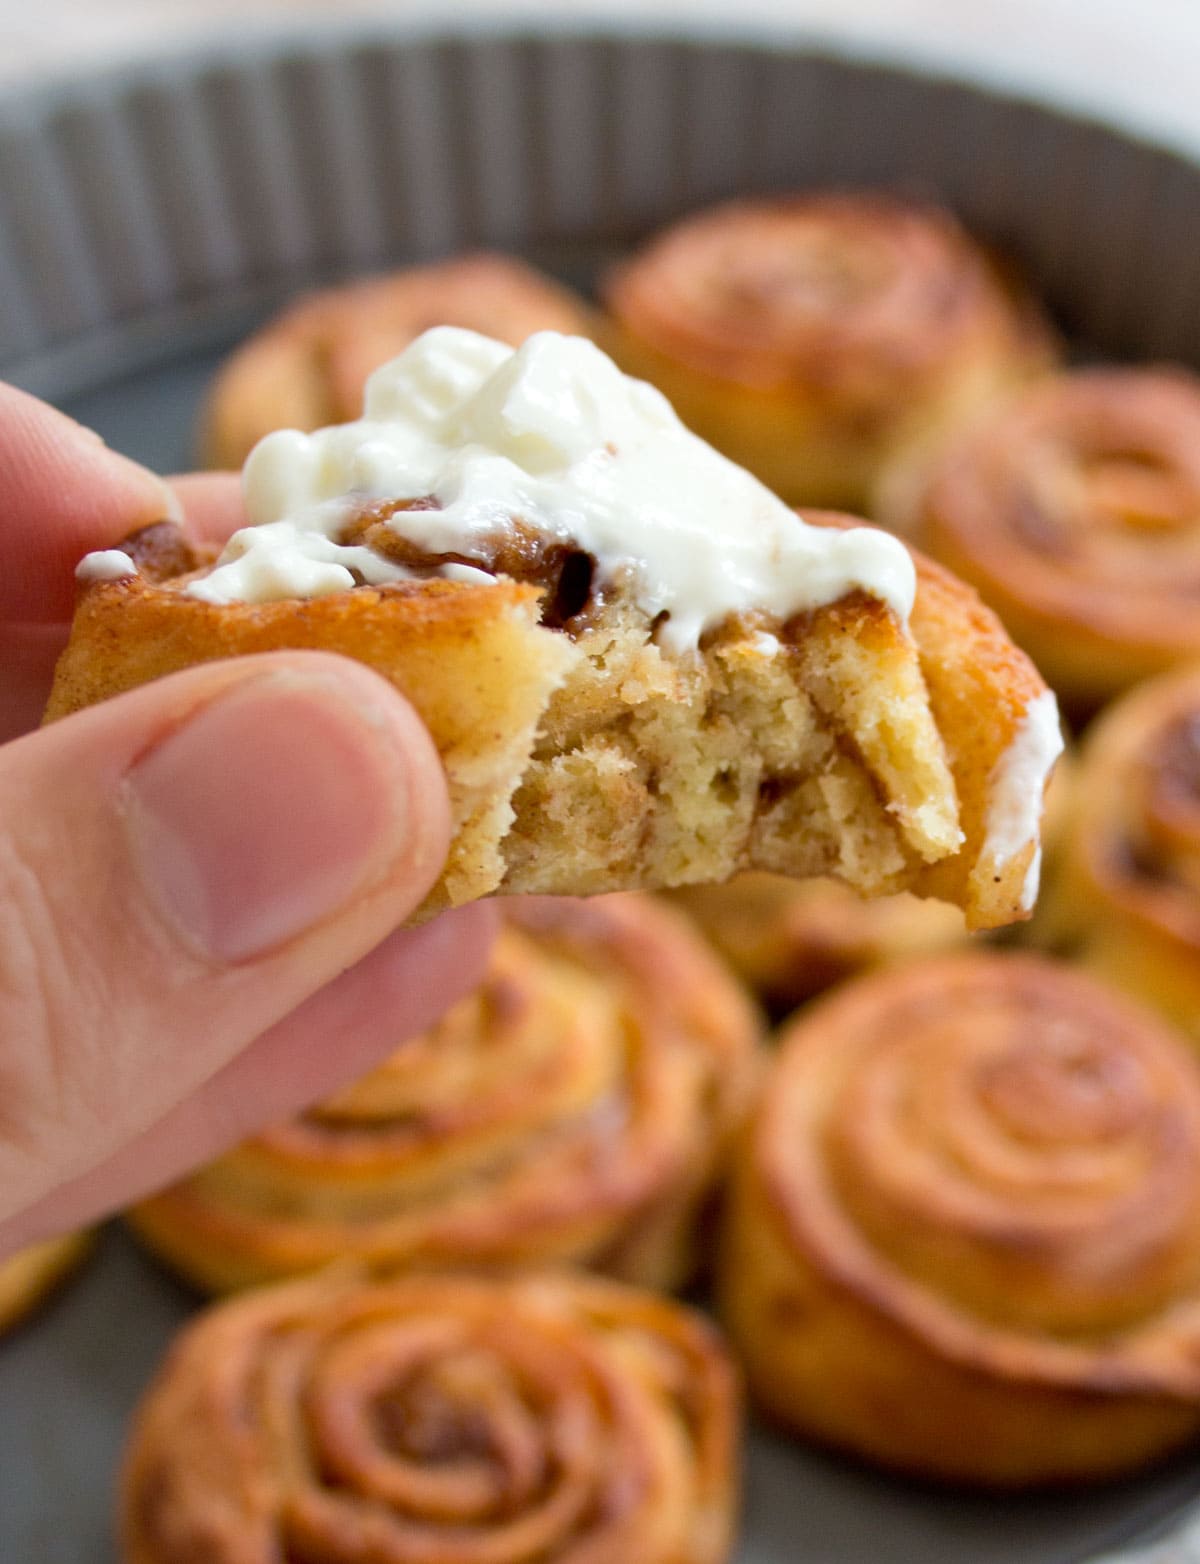 Hand holding a bitten cinnamon roll with frosting.